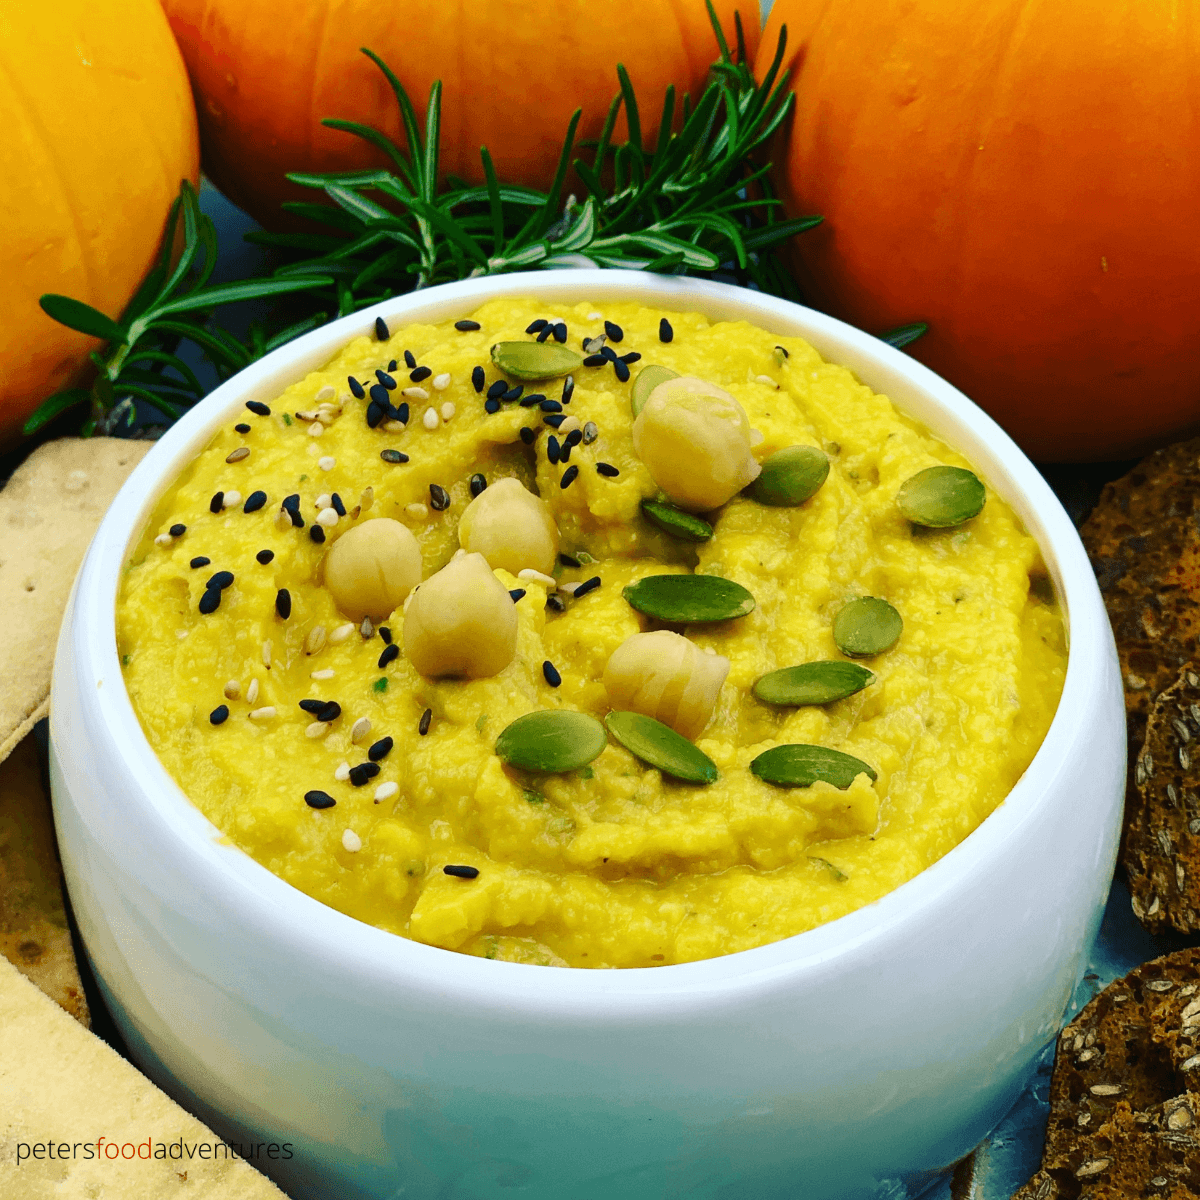 Easy Pumpkin Hummus is healthy appetizer and perfect for fall or Thanksgiving. Made in minutes, with pumpkin, chickpeas, garlic and rosemary. A vegan savory dip that everyone will enjoy.